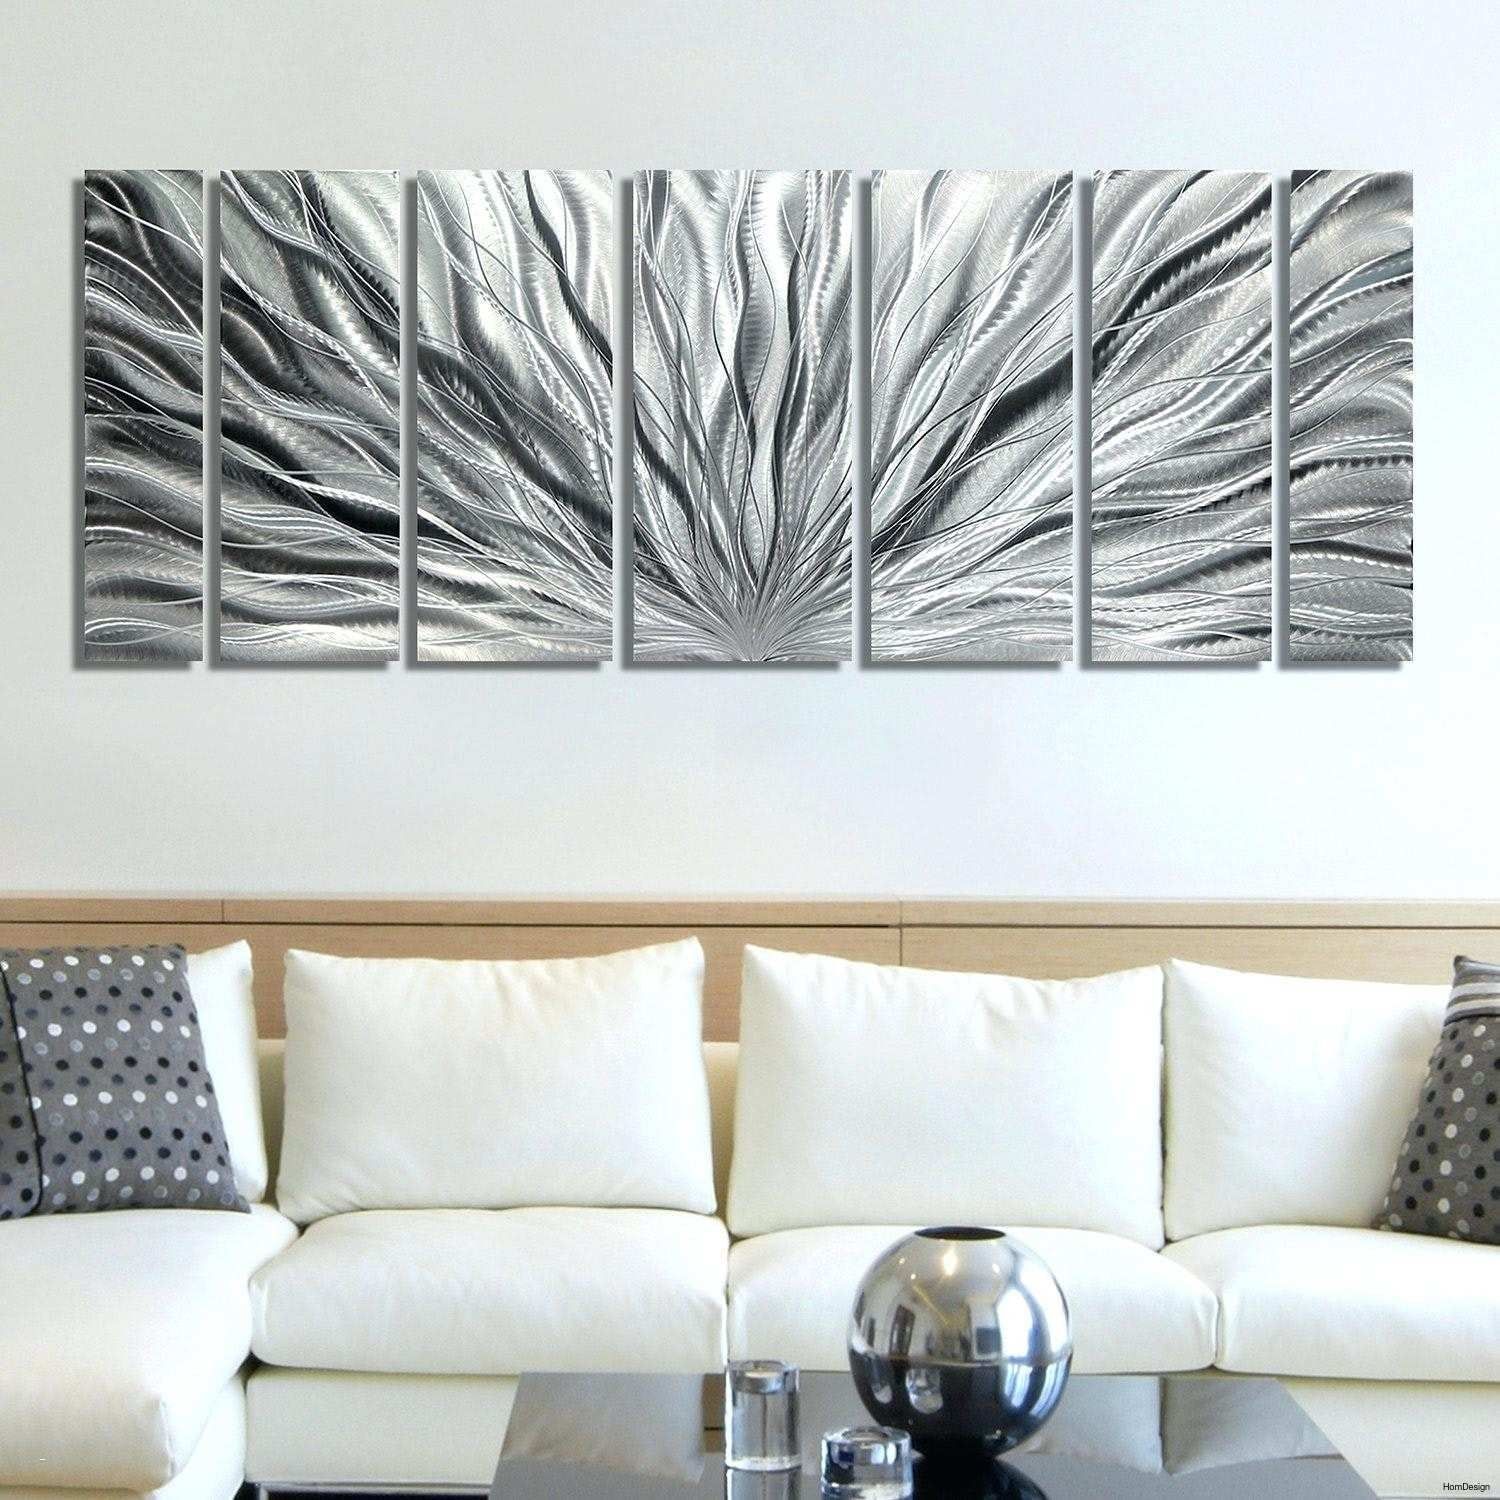 Wayfair Decorative Wall Mirrors Unique 30 Unique Wire Wall Art Home With Wayfair Wall Art (View 10 of 20)